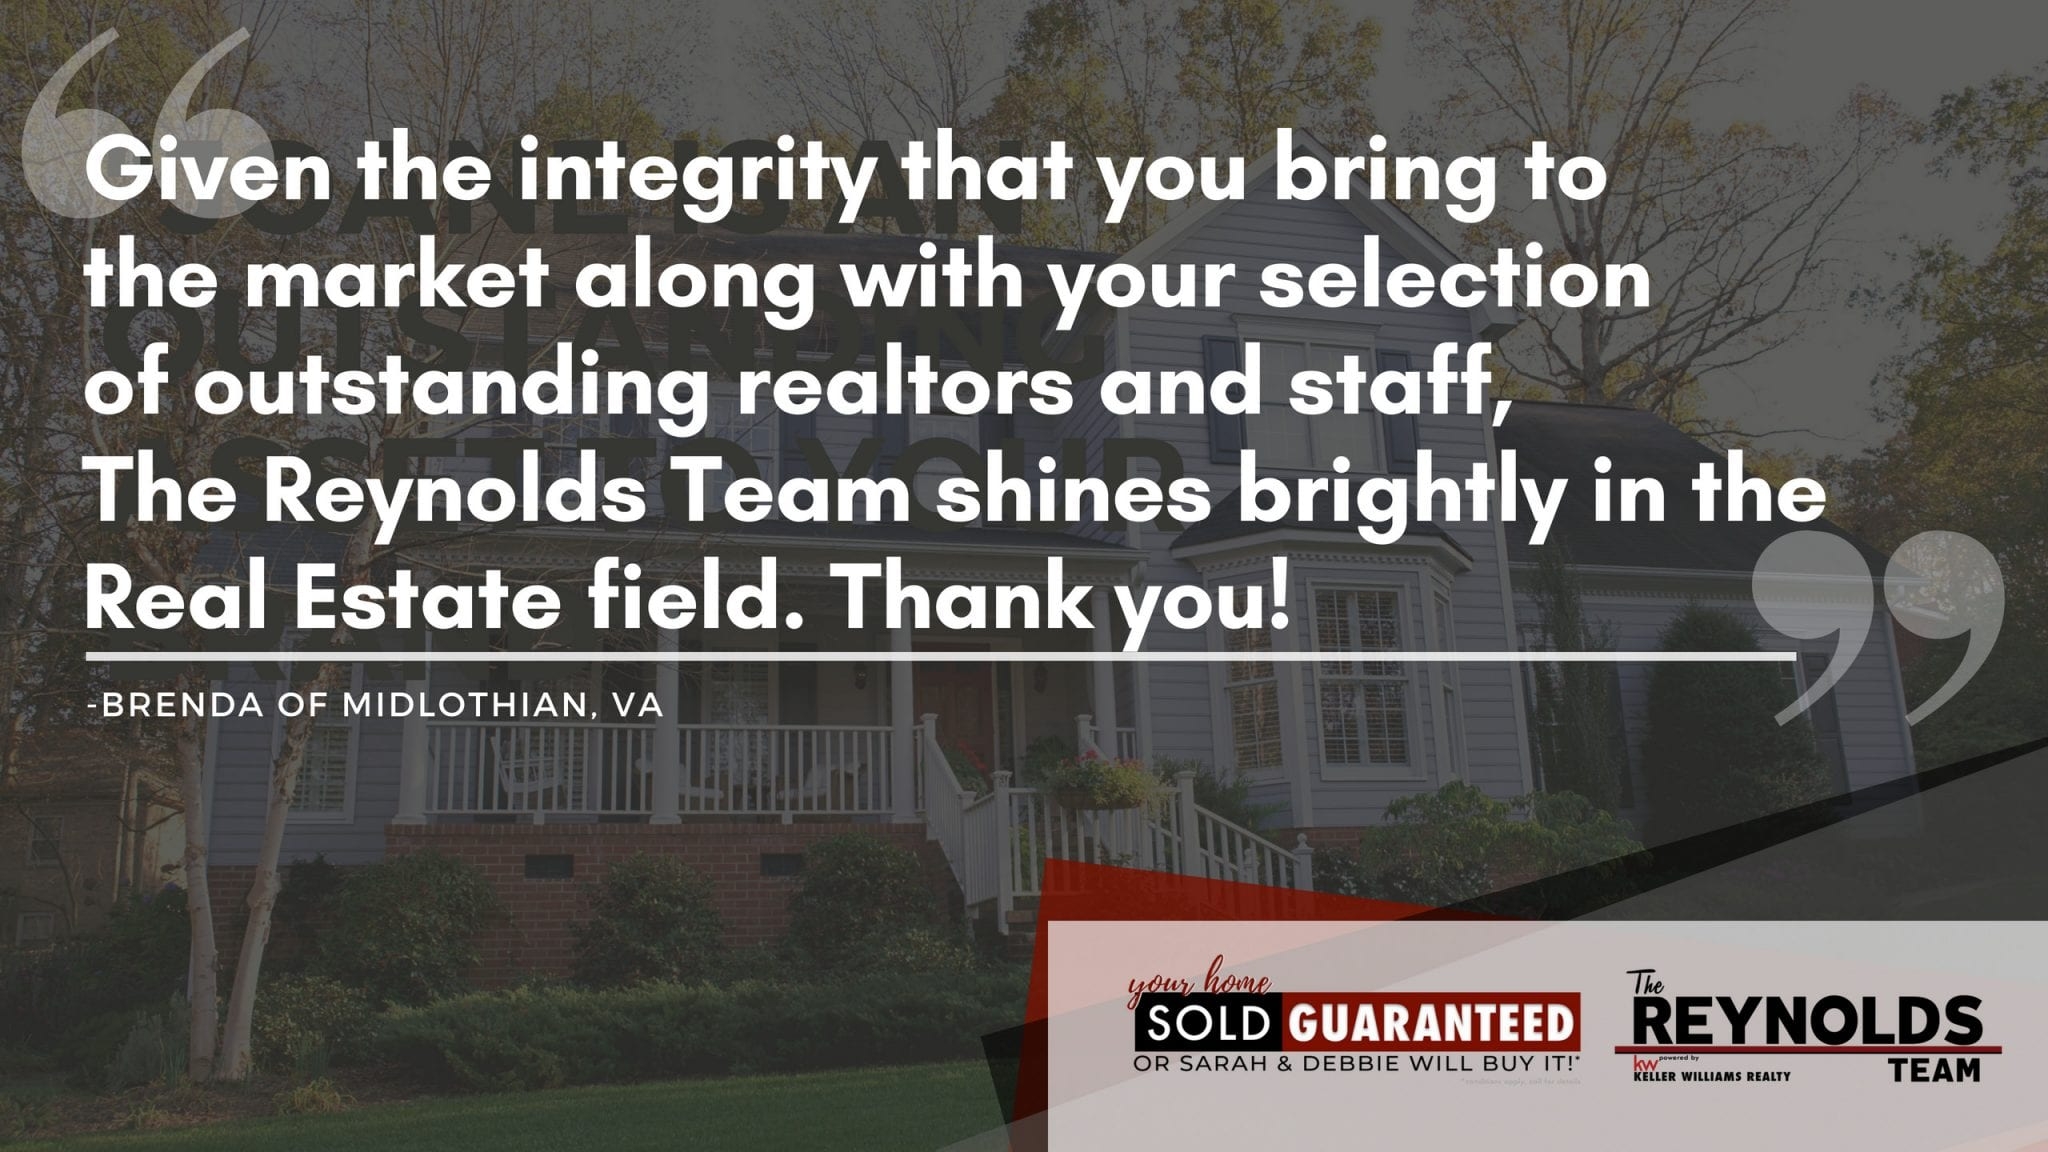 Midlothian, VA Home Buyer says, “..The Reynolds Team shines brightly in the Real Estate field.”